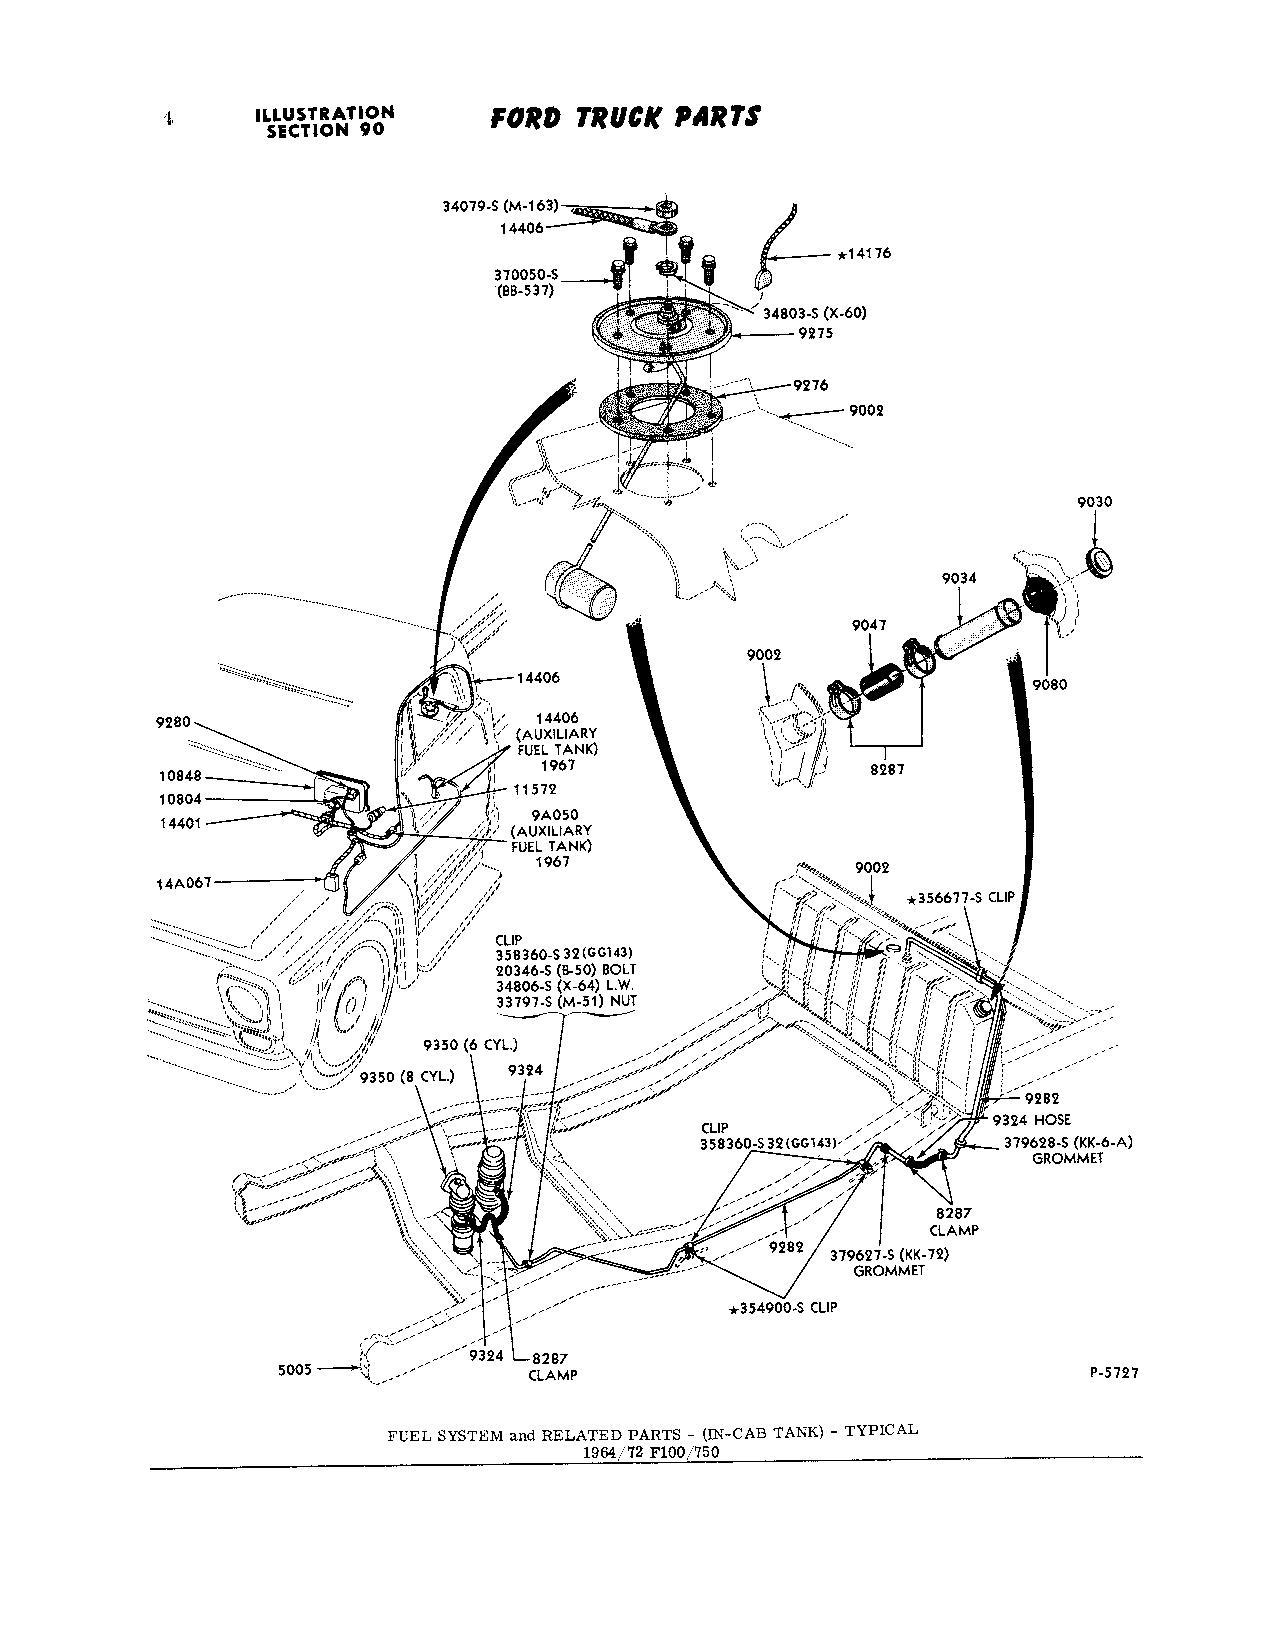 1964 F100 Gas Gauge Internal Wiring - Ford Truck Enthusiasts Forums